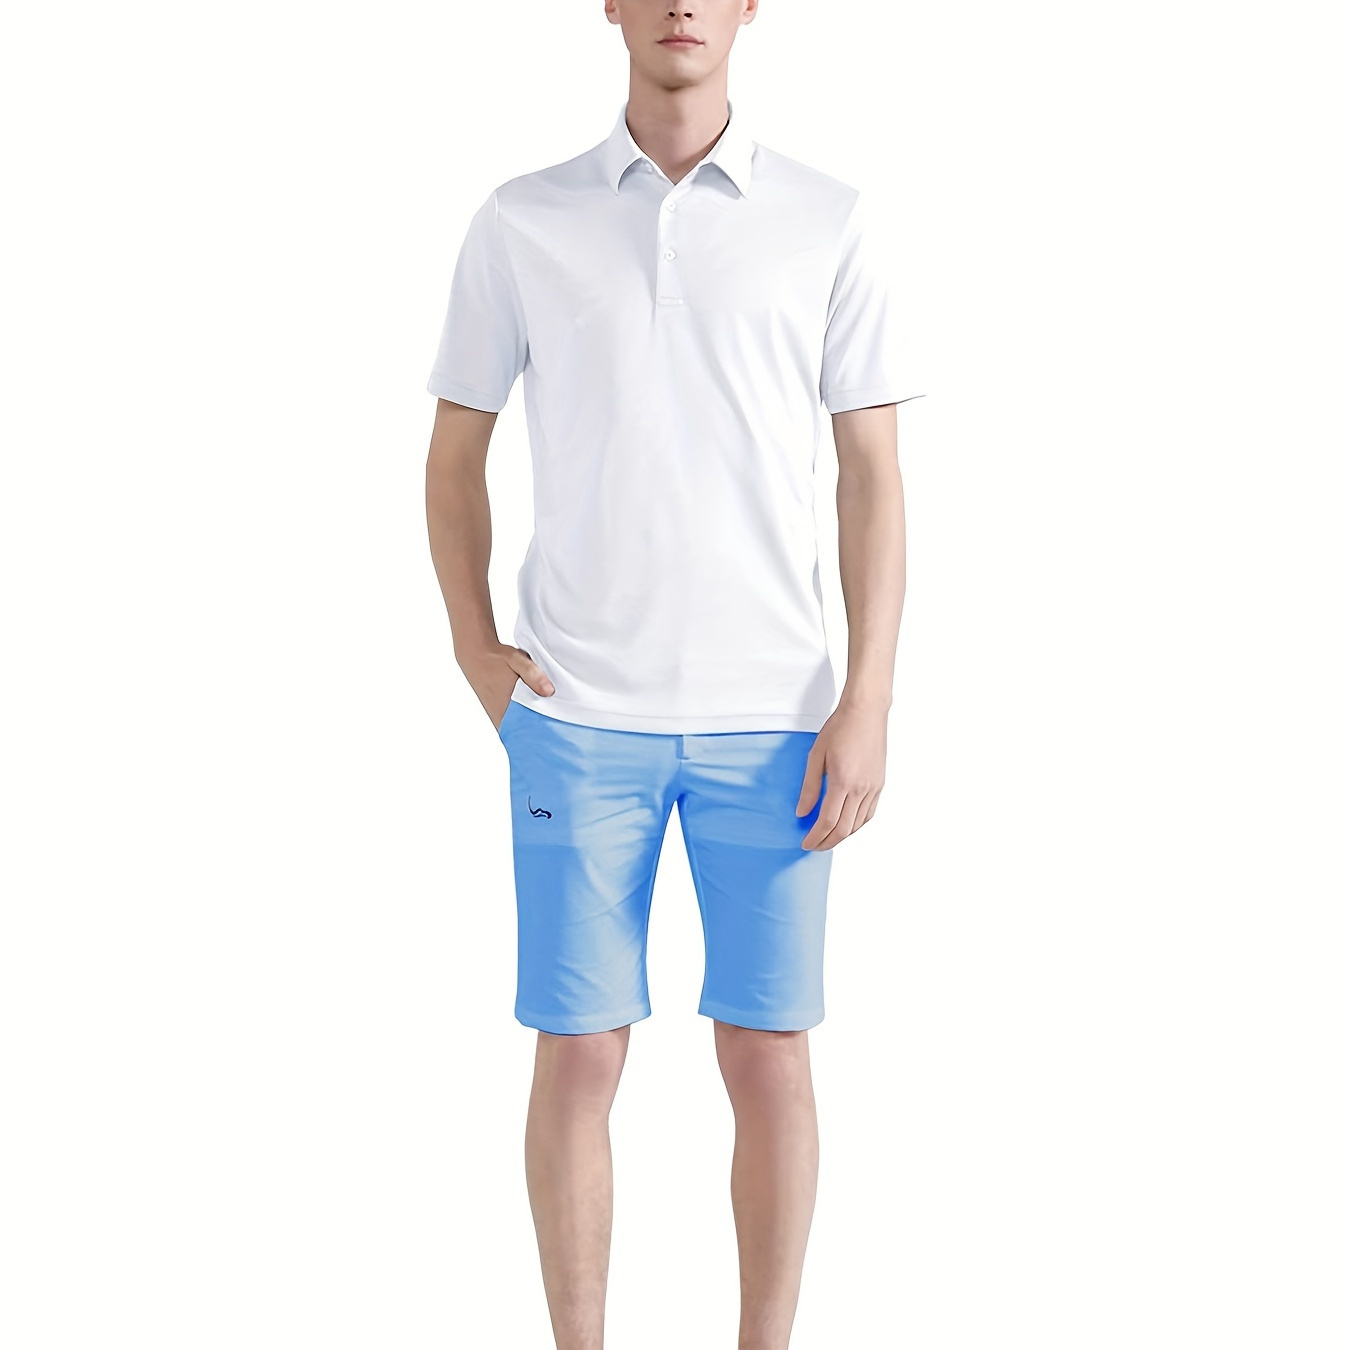 

Men's Casual White Turndown Collar Shirt, Male Short Sleeve Top, Sports Leisure Soft Adult Tennis Clothing For Outdoor